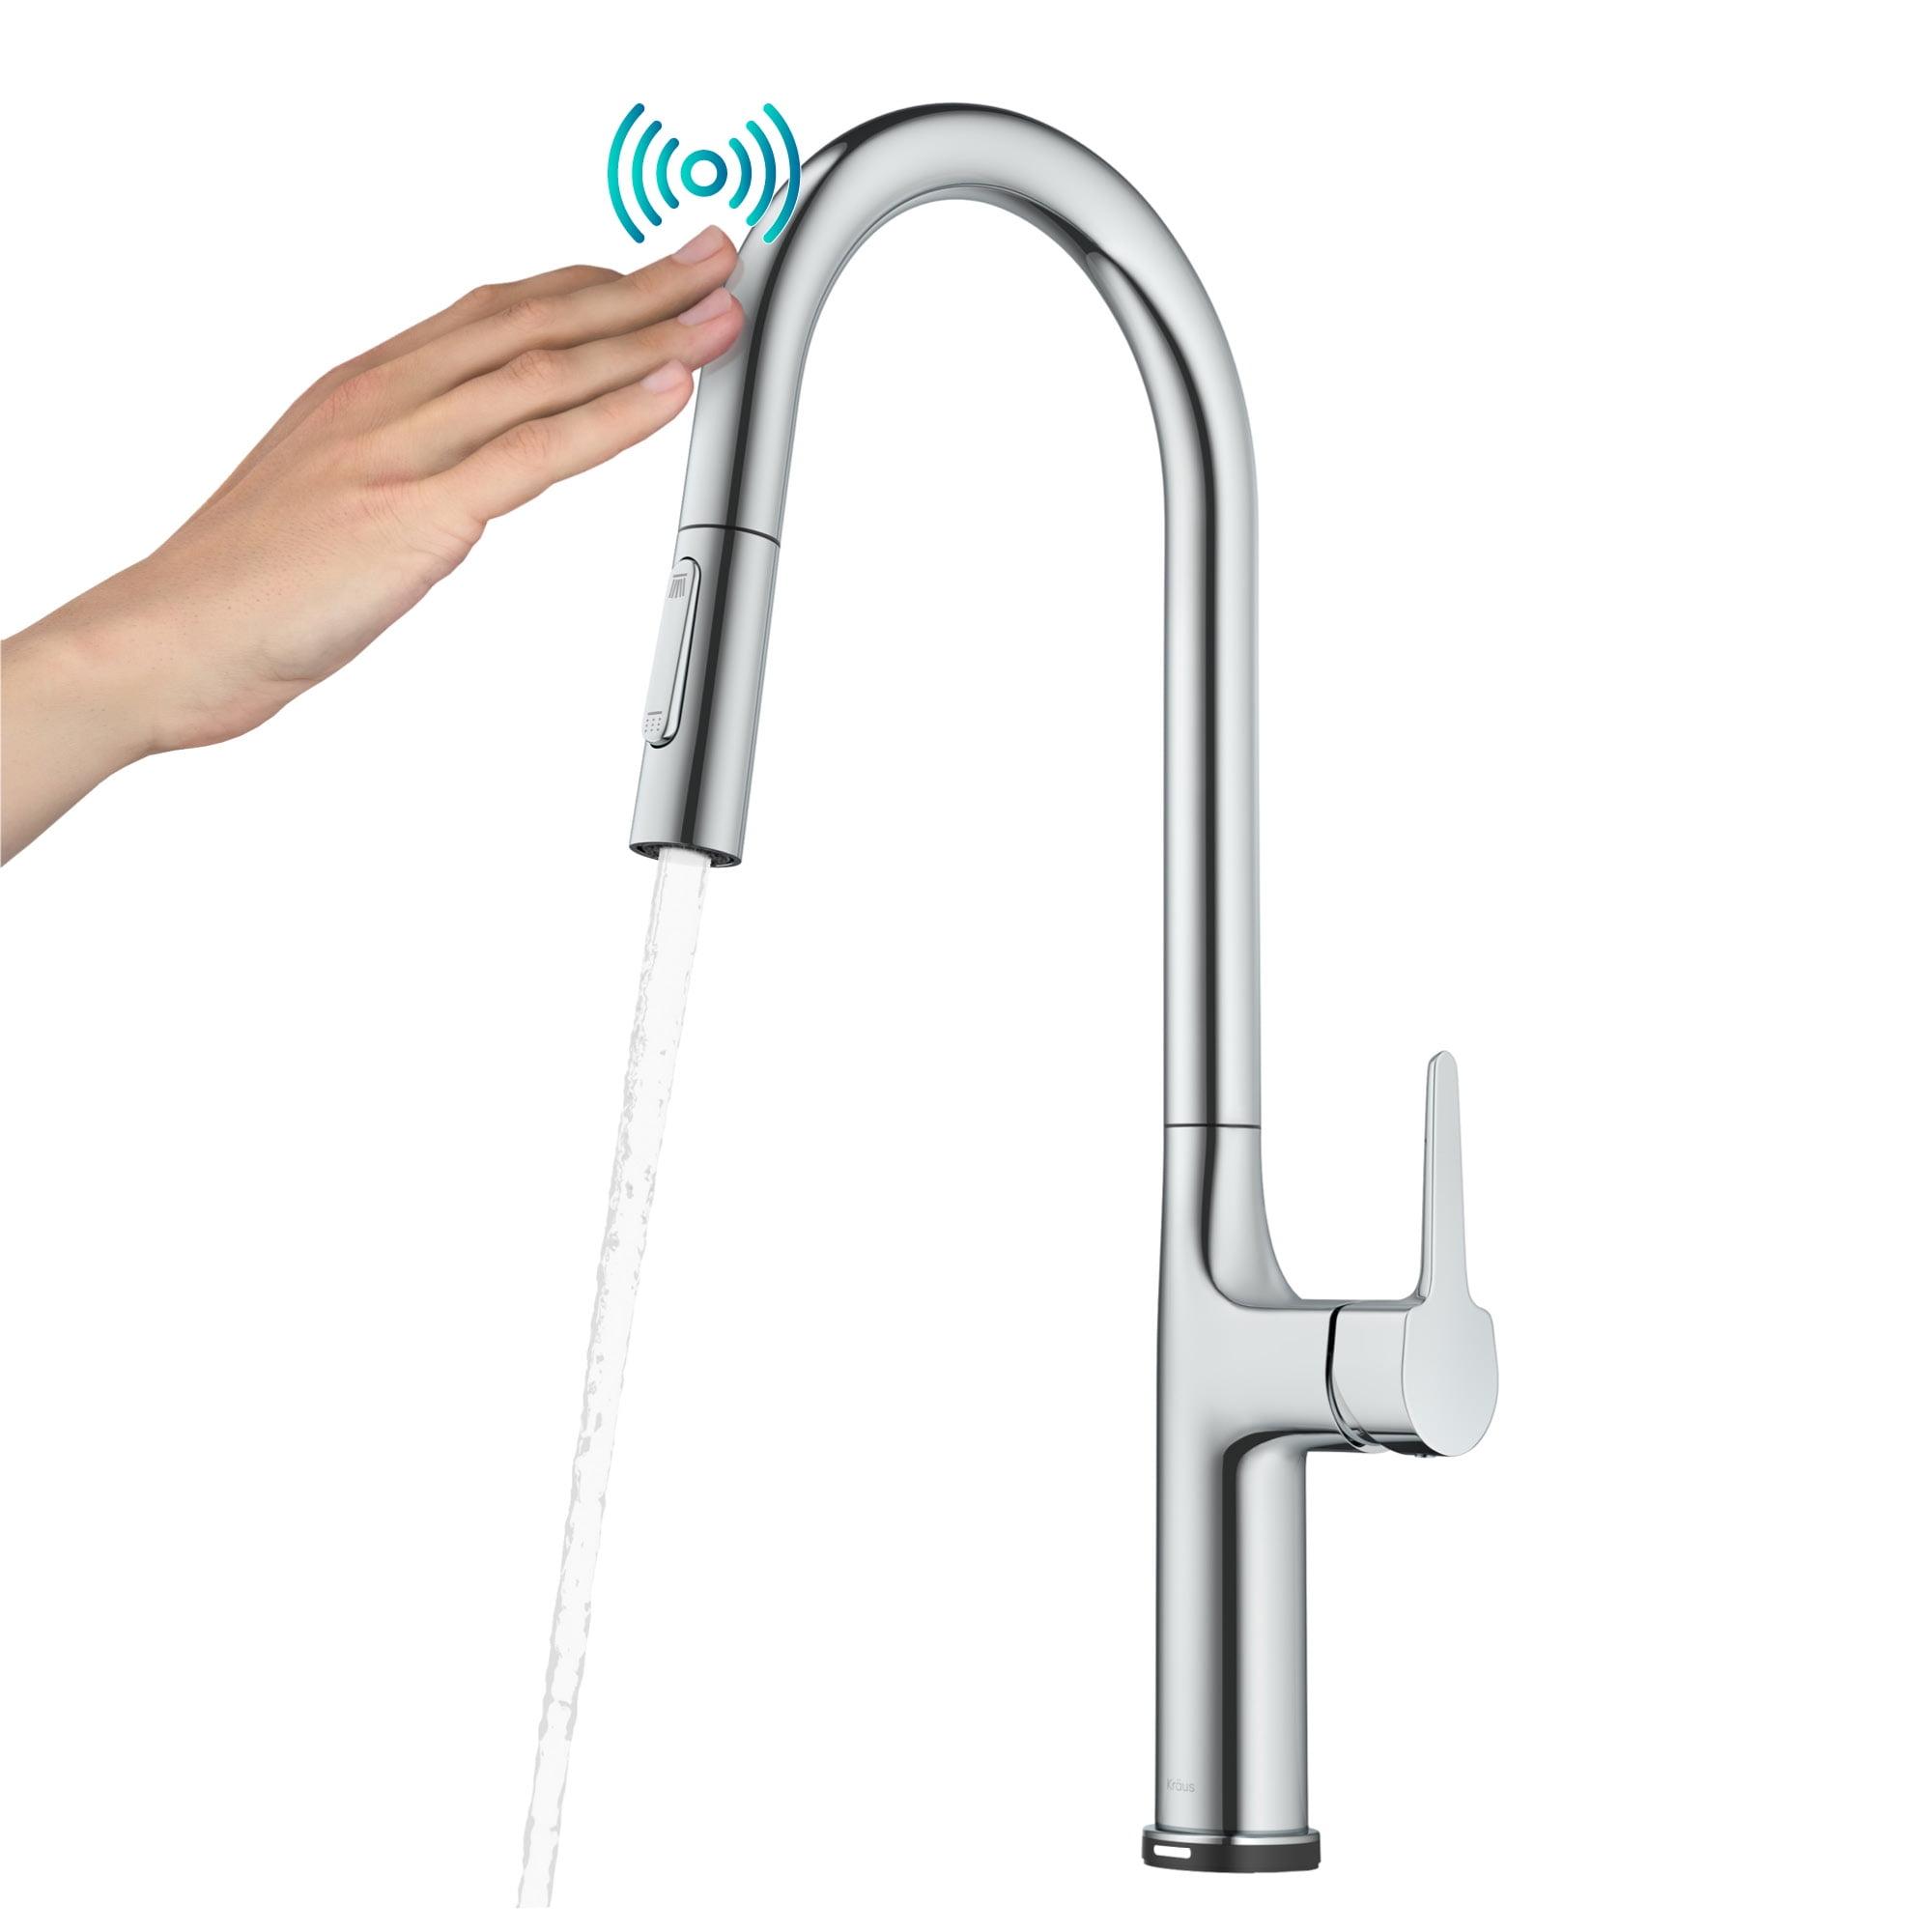 Oletto Sleek Chrome High-Arc Touch-Control Kitchen Faucet with Pull-Down Sprayer